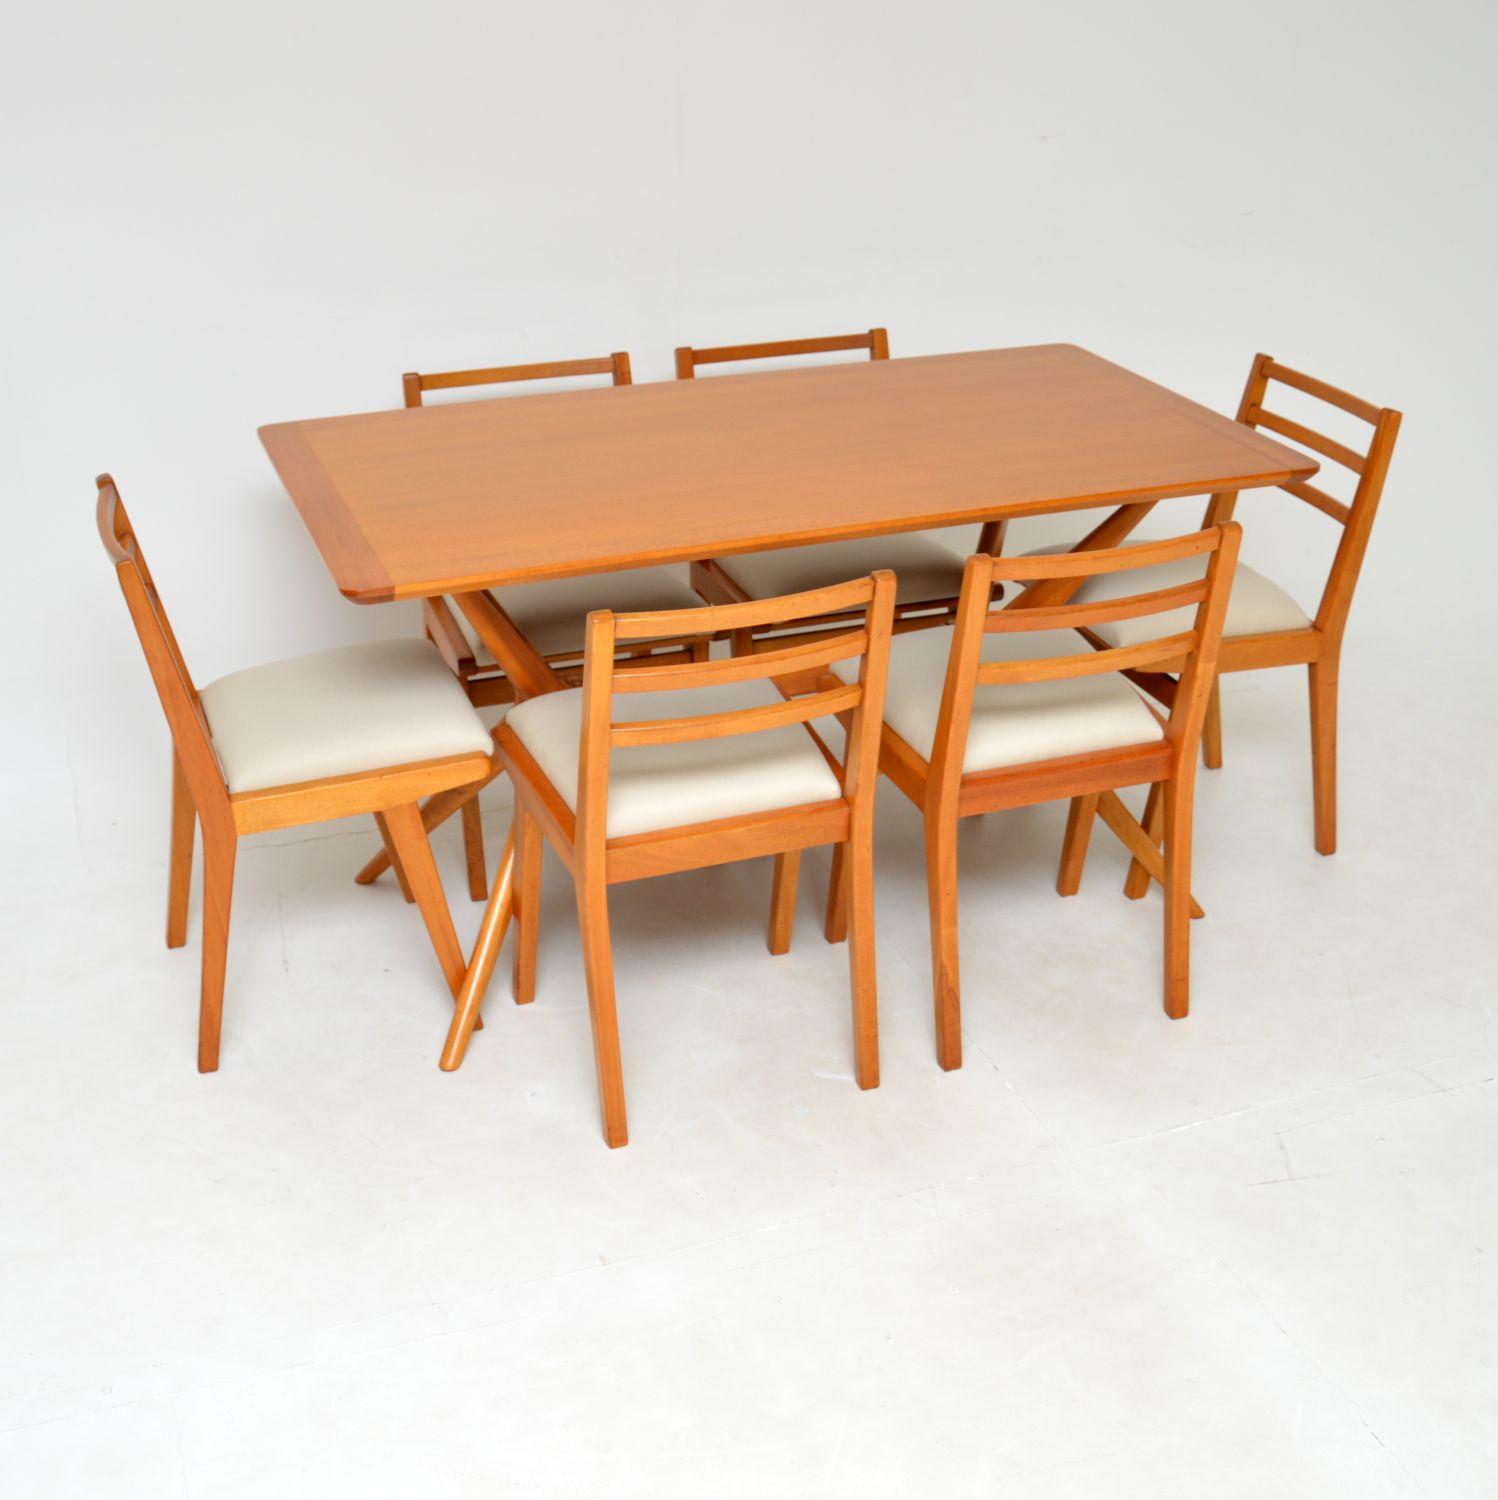 A stunning original vintage dining table and chairs from the Redford range by E. Gomme, later known as G plan. This was made in England, it dates from the 1950’s.
The construction is solid oak, which has been polished to a gorgeous light colour